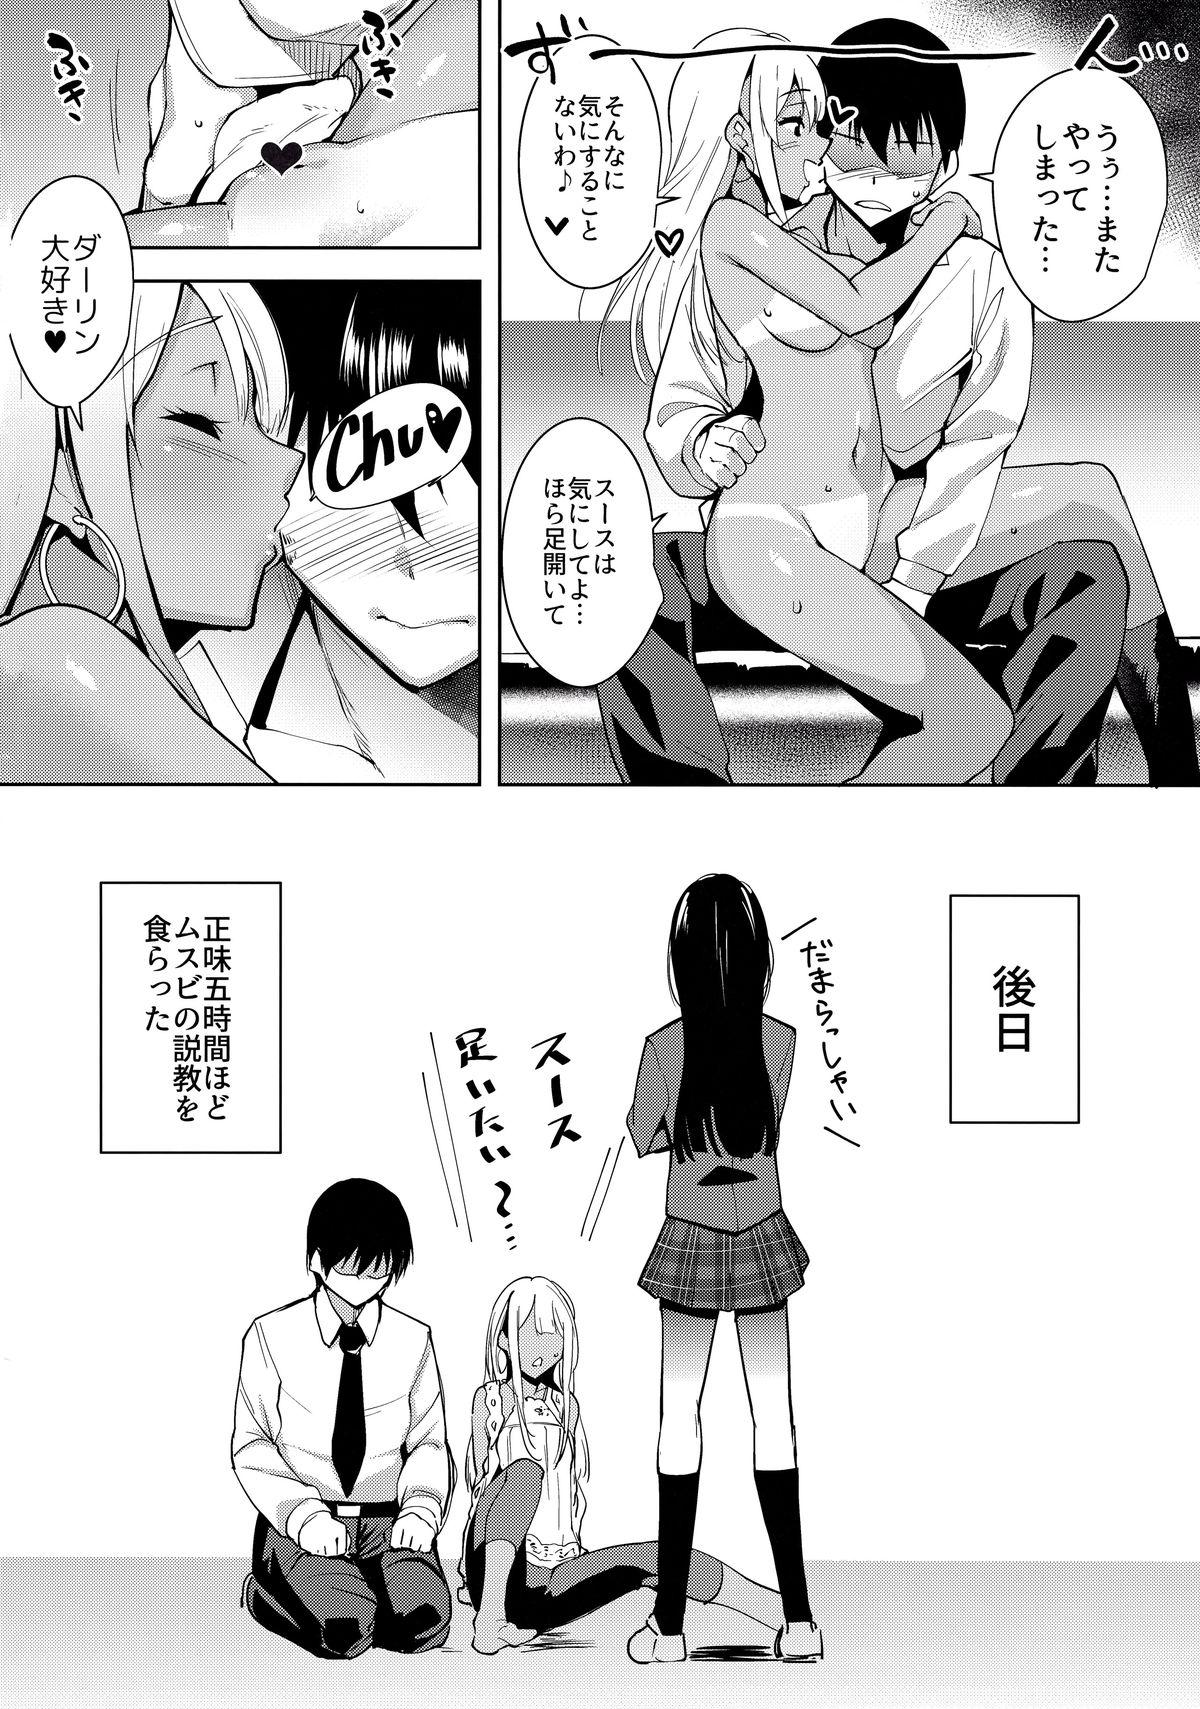 Old Man 7SU2 - Tokyo 7th sisters Lesbian Sex - Page 23